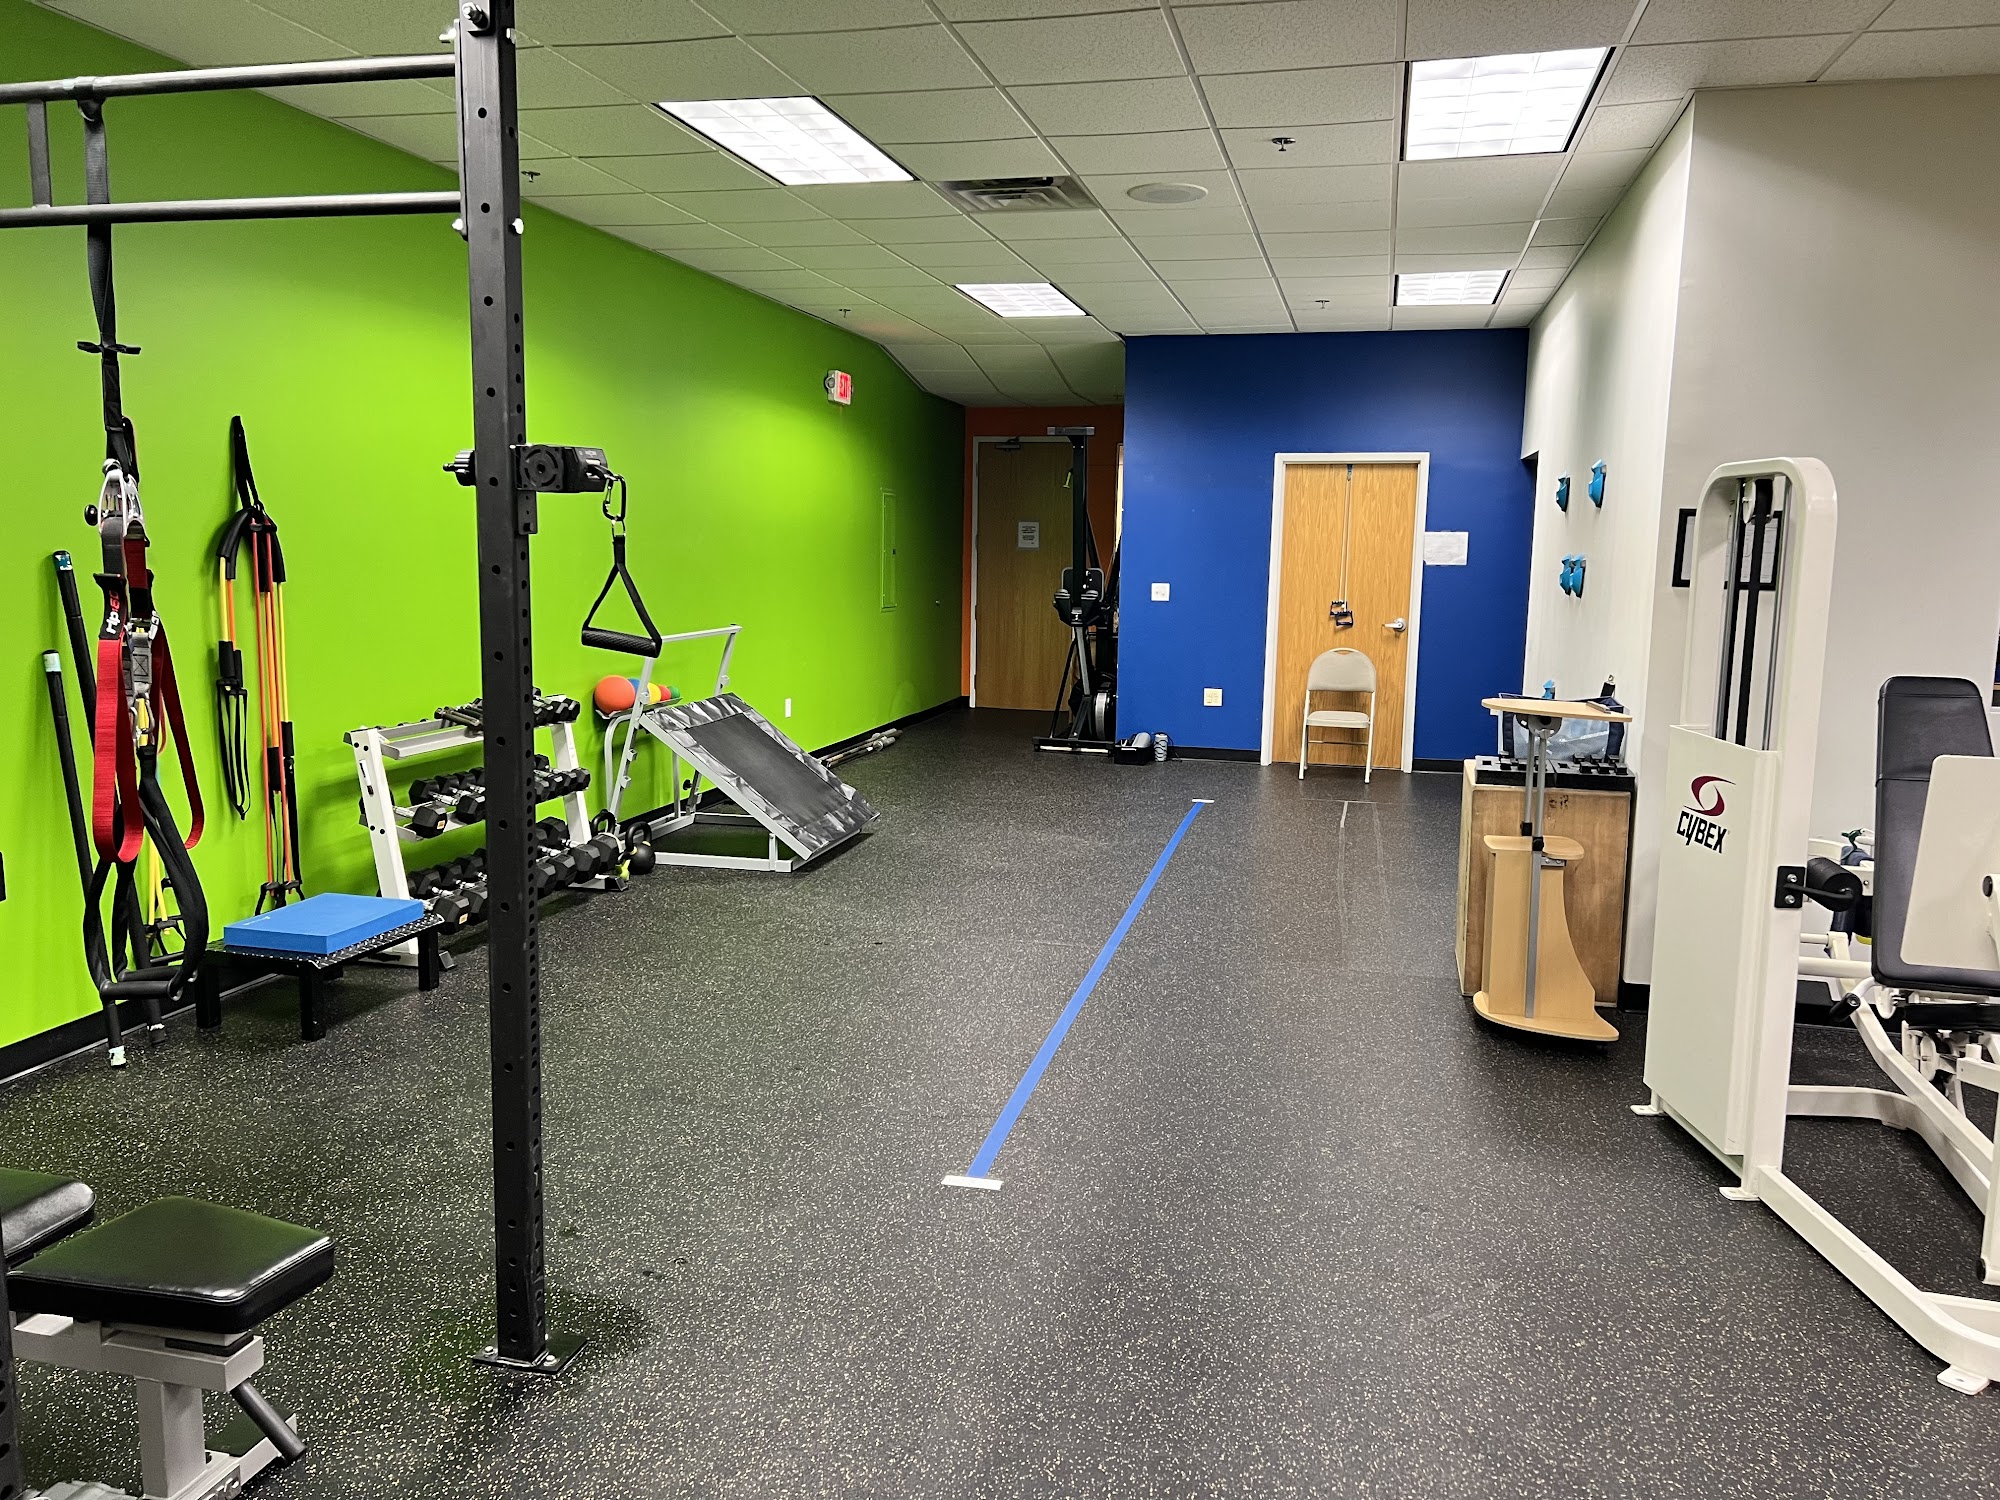 Physical Therapy Innovations 65 South St #101, Hopkinton Massachusetts 01748